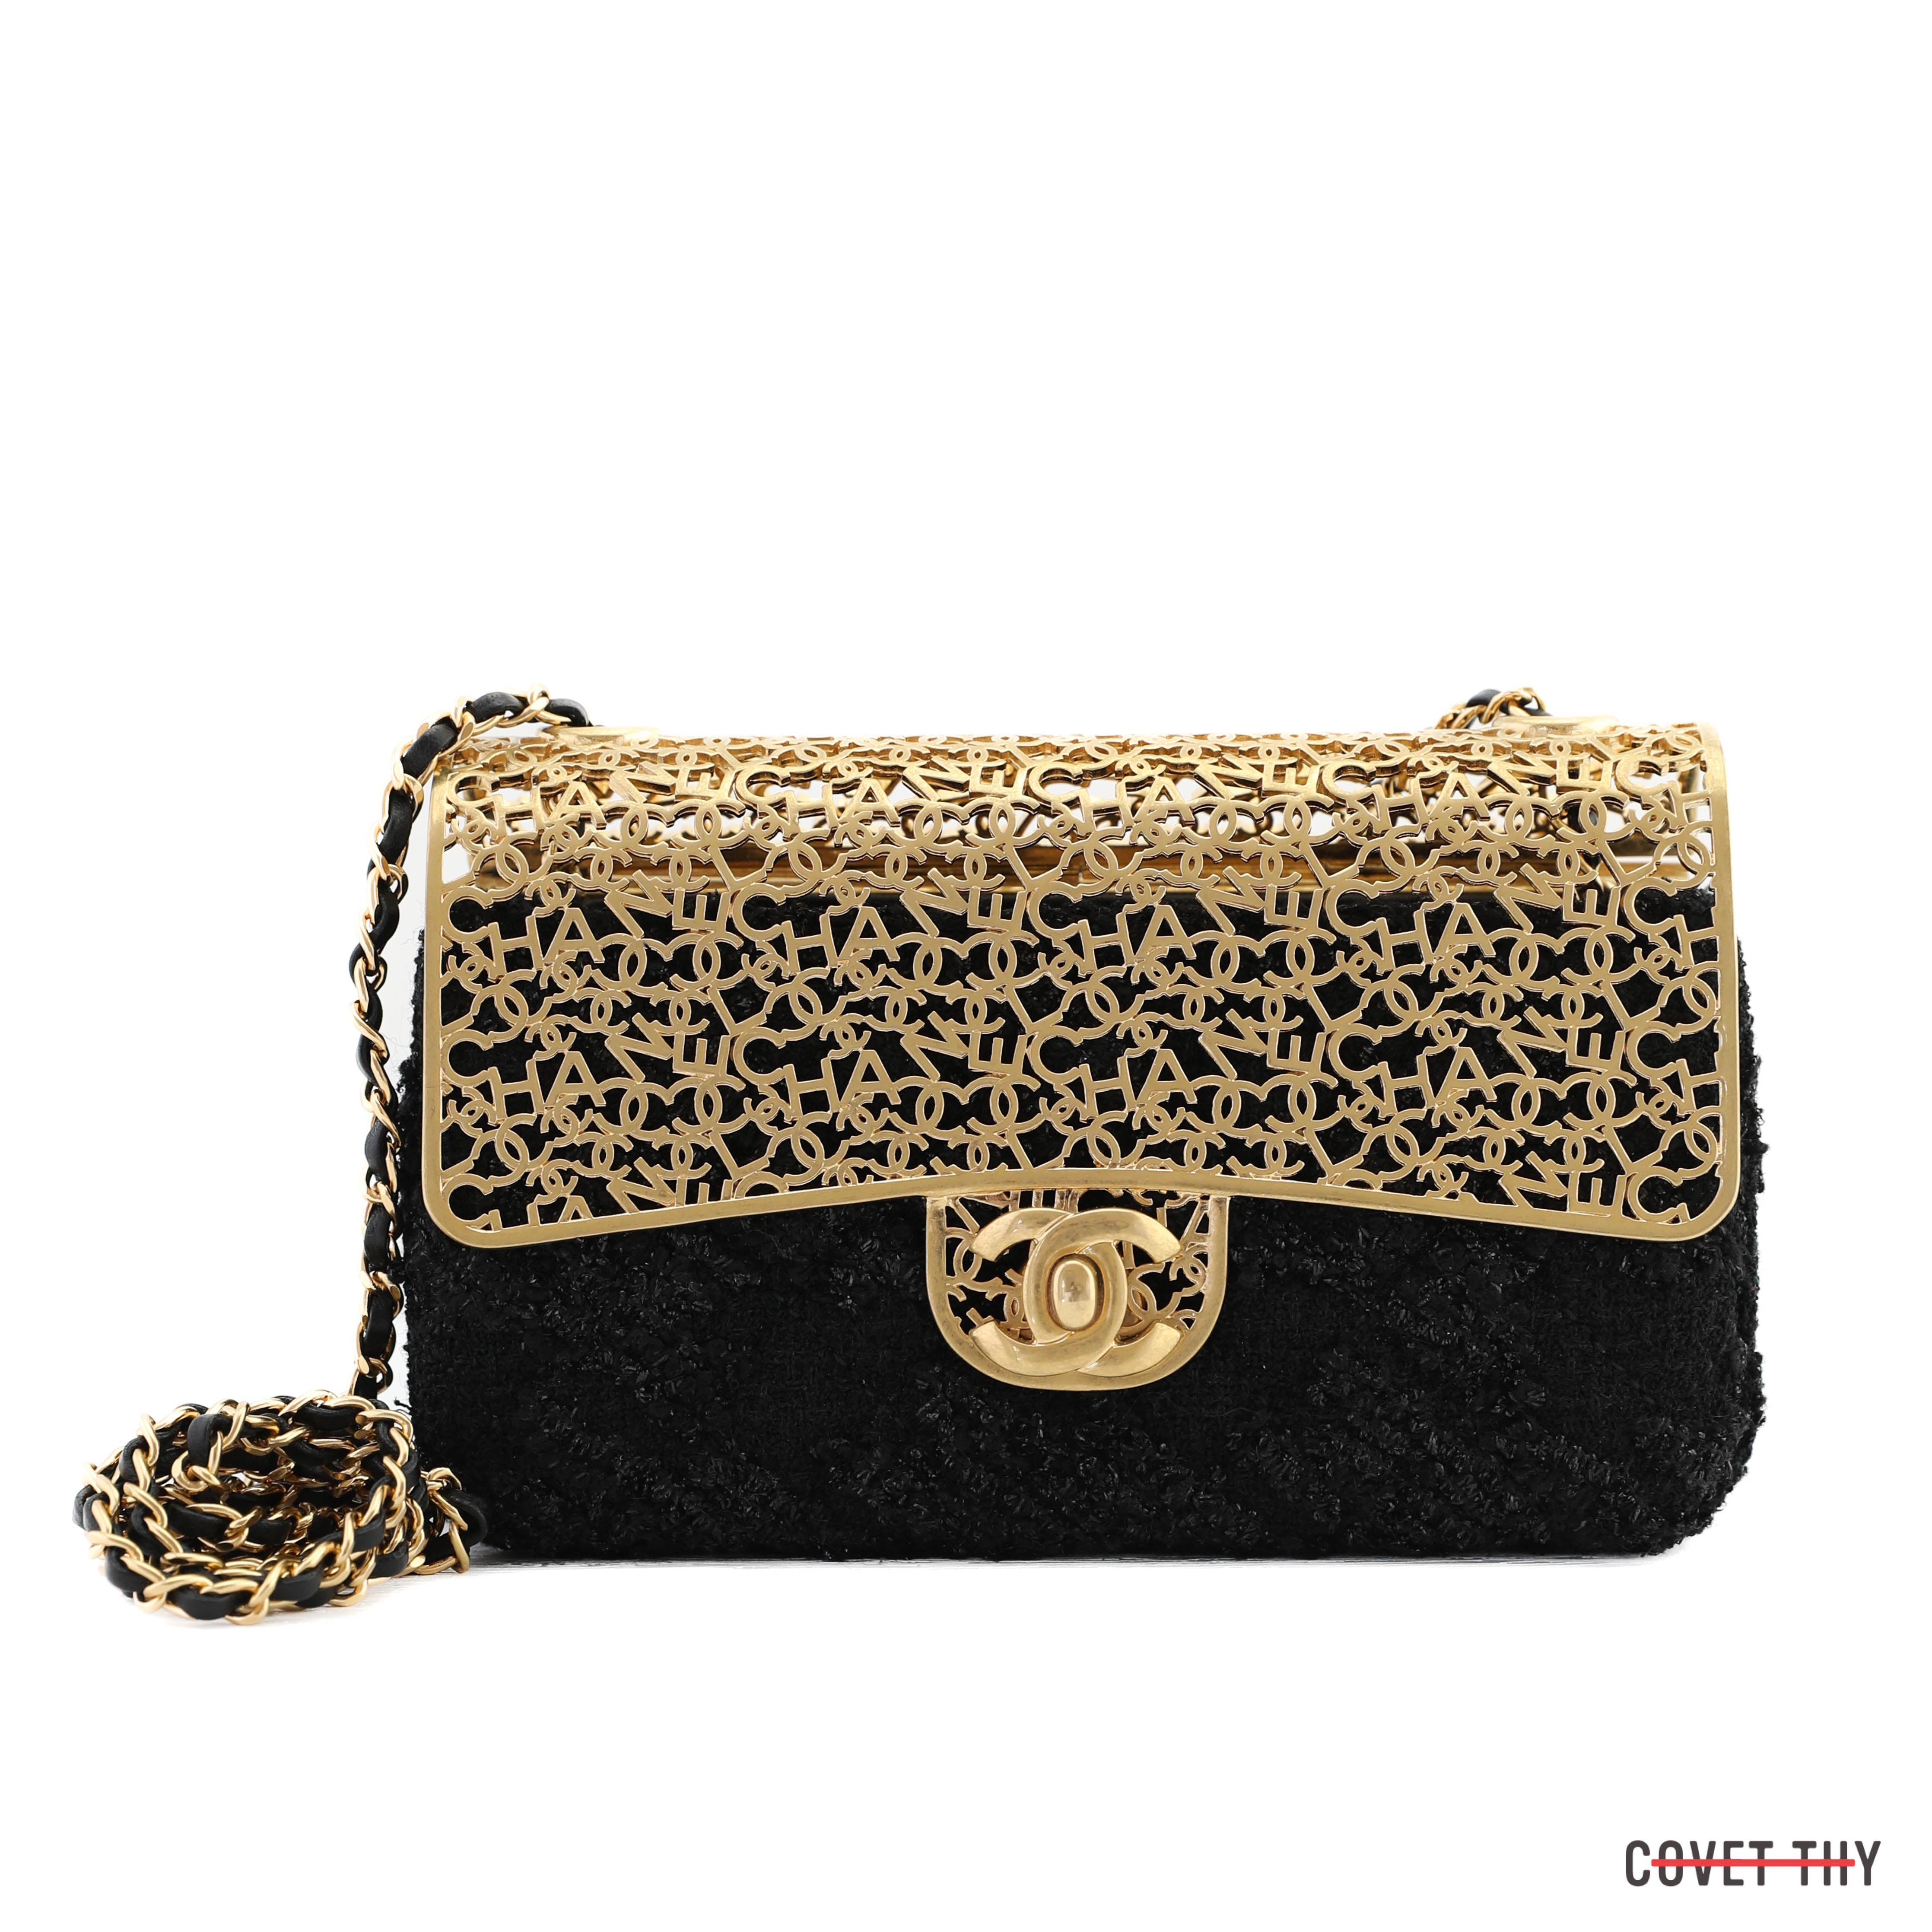 Chanel Ivory Tweed Oversized Clutch Bag with gold Hardware